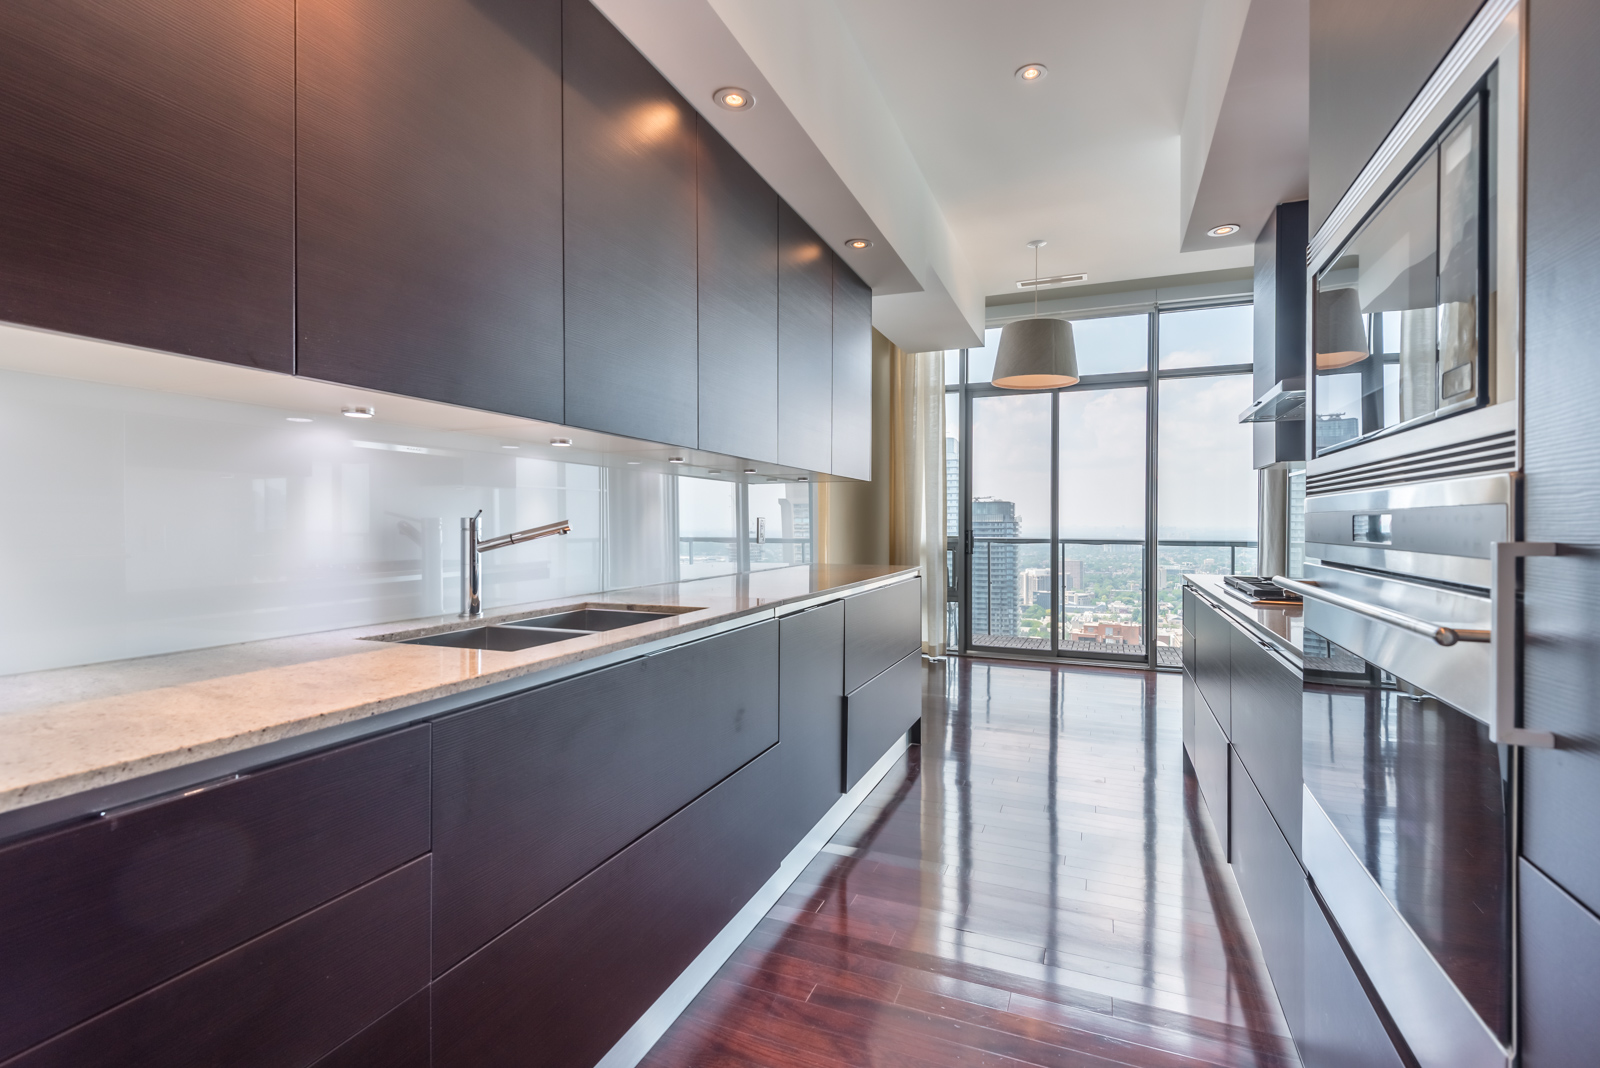 Galley kitchen with dark cabinets on either side of penthouse suite at 33 Charles St E Casa Condos.